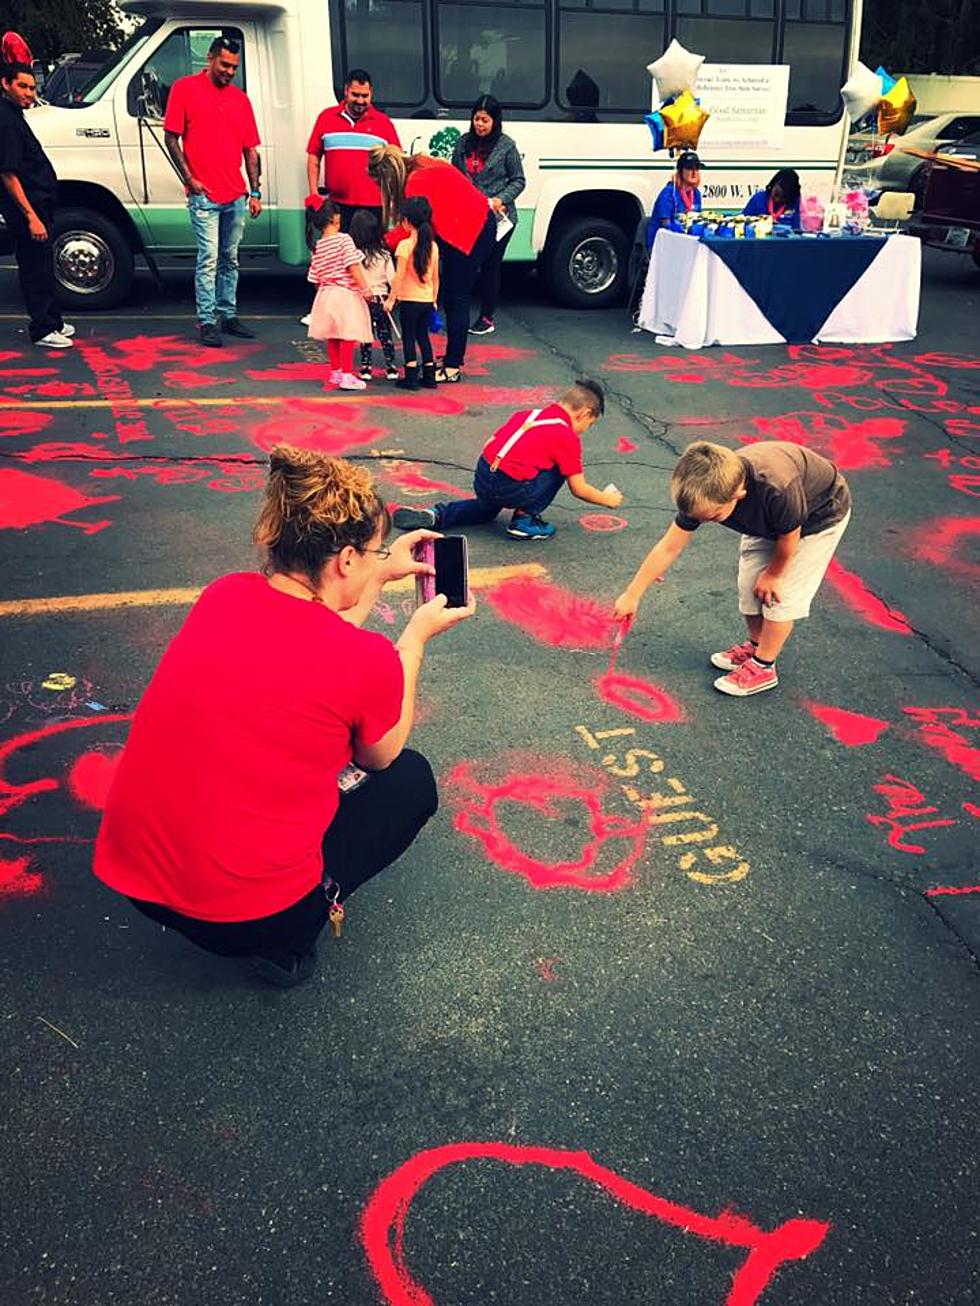 The Red Sand Project Event Went Very Well Saturday — Raising Awarness About Human Trafficking